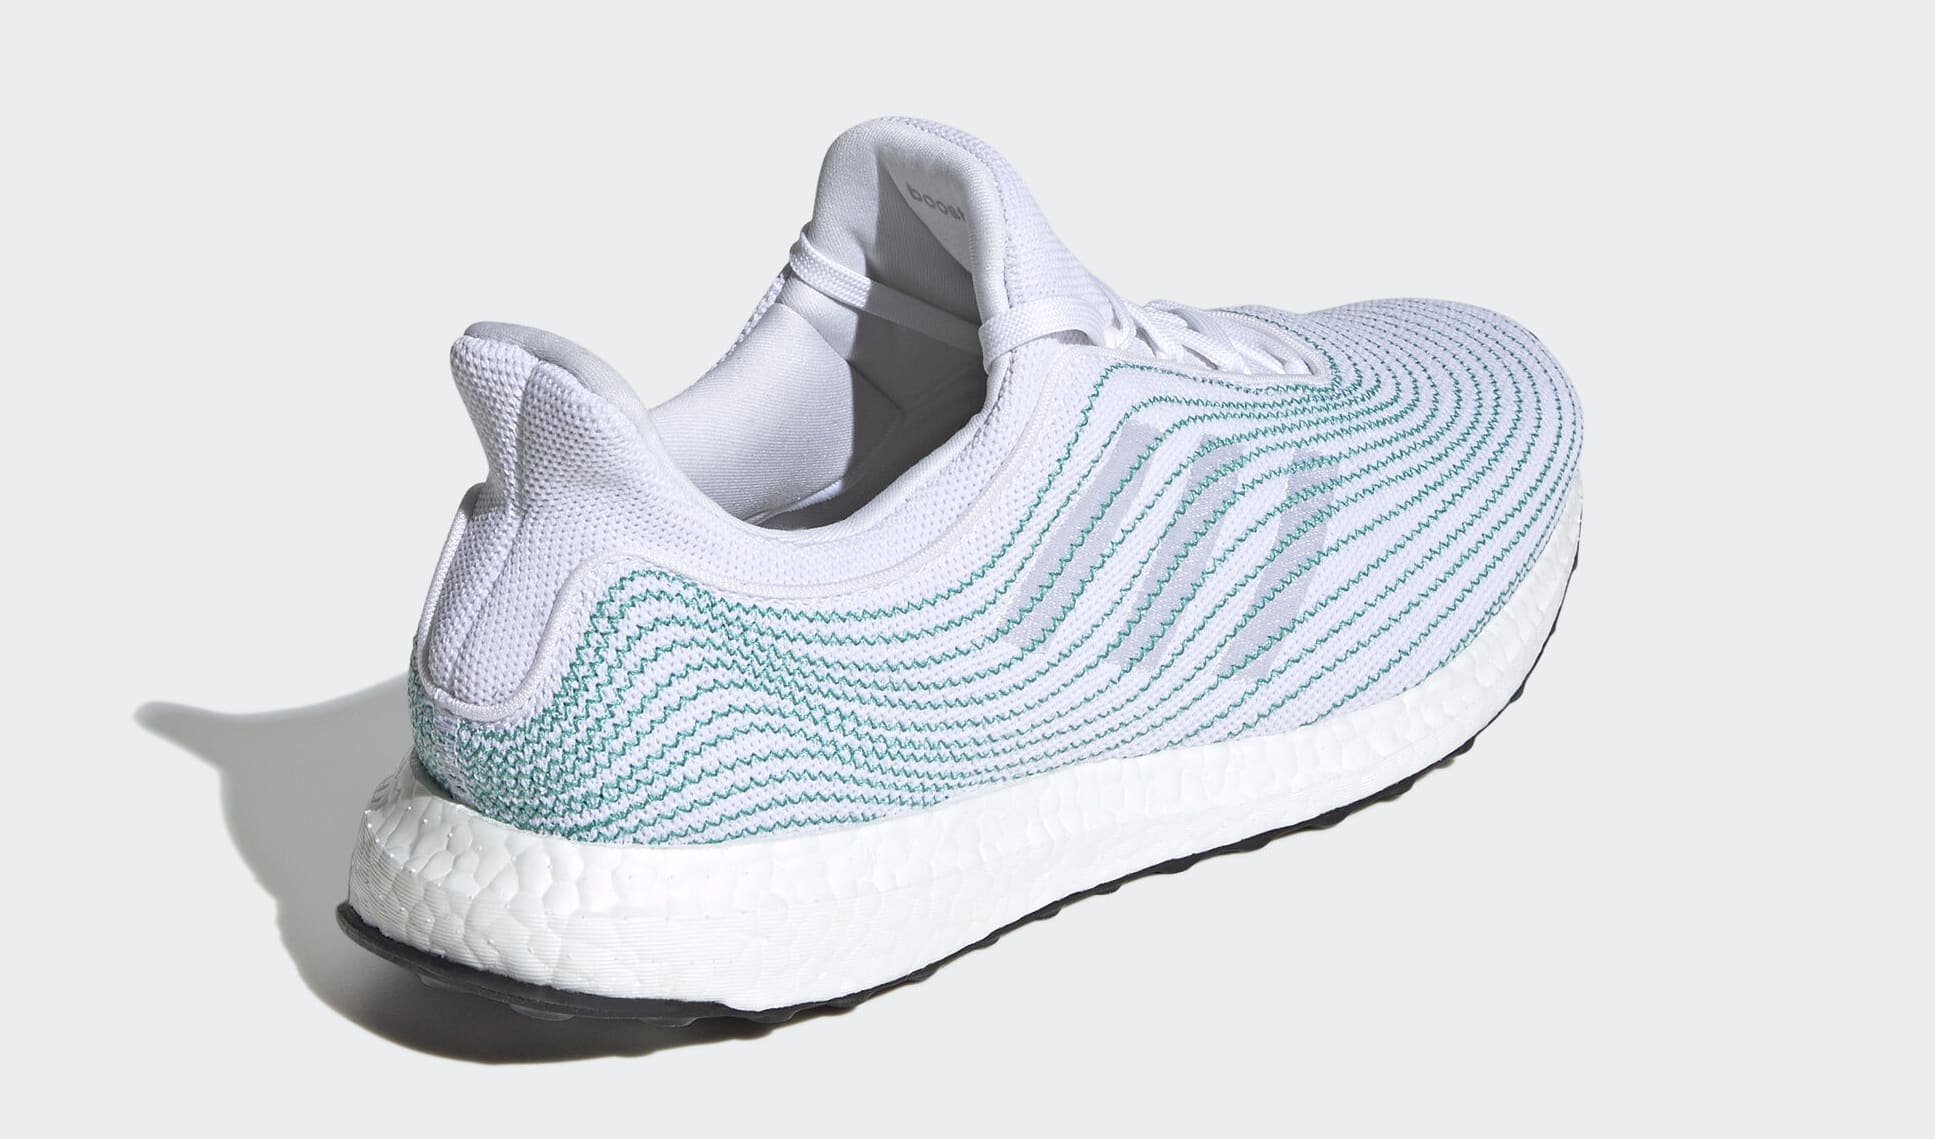 Parley x Adidas Ultra Boost Uncaged EH1173 Heel